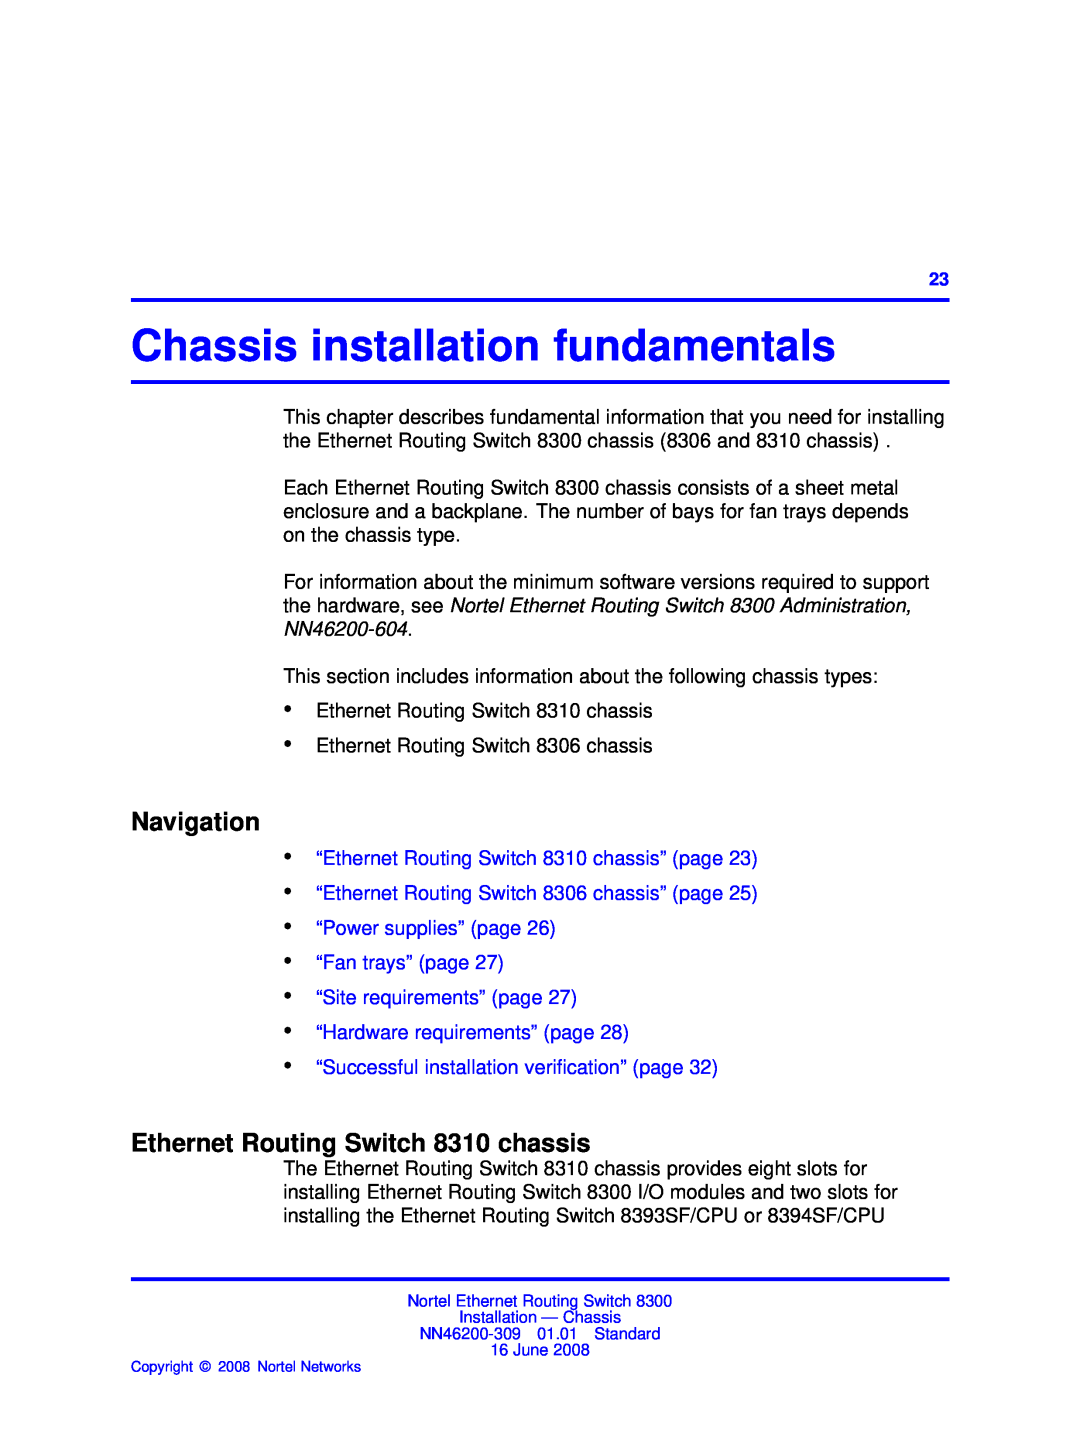 Nortel Networks 8306 Chassis installation fundamentals, Ethernet Routing Switch 8310 chassis, “Hardware requirements” page 